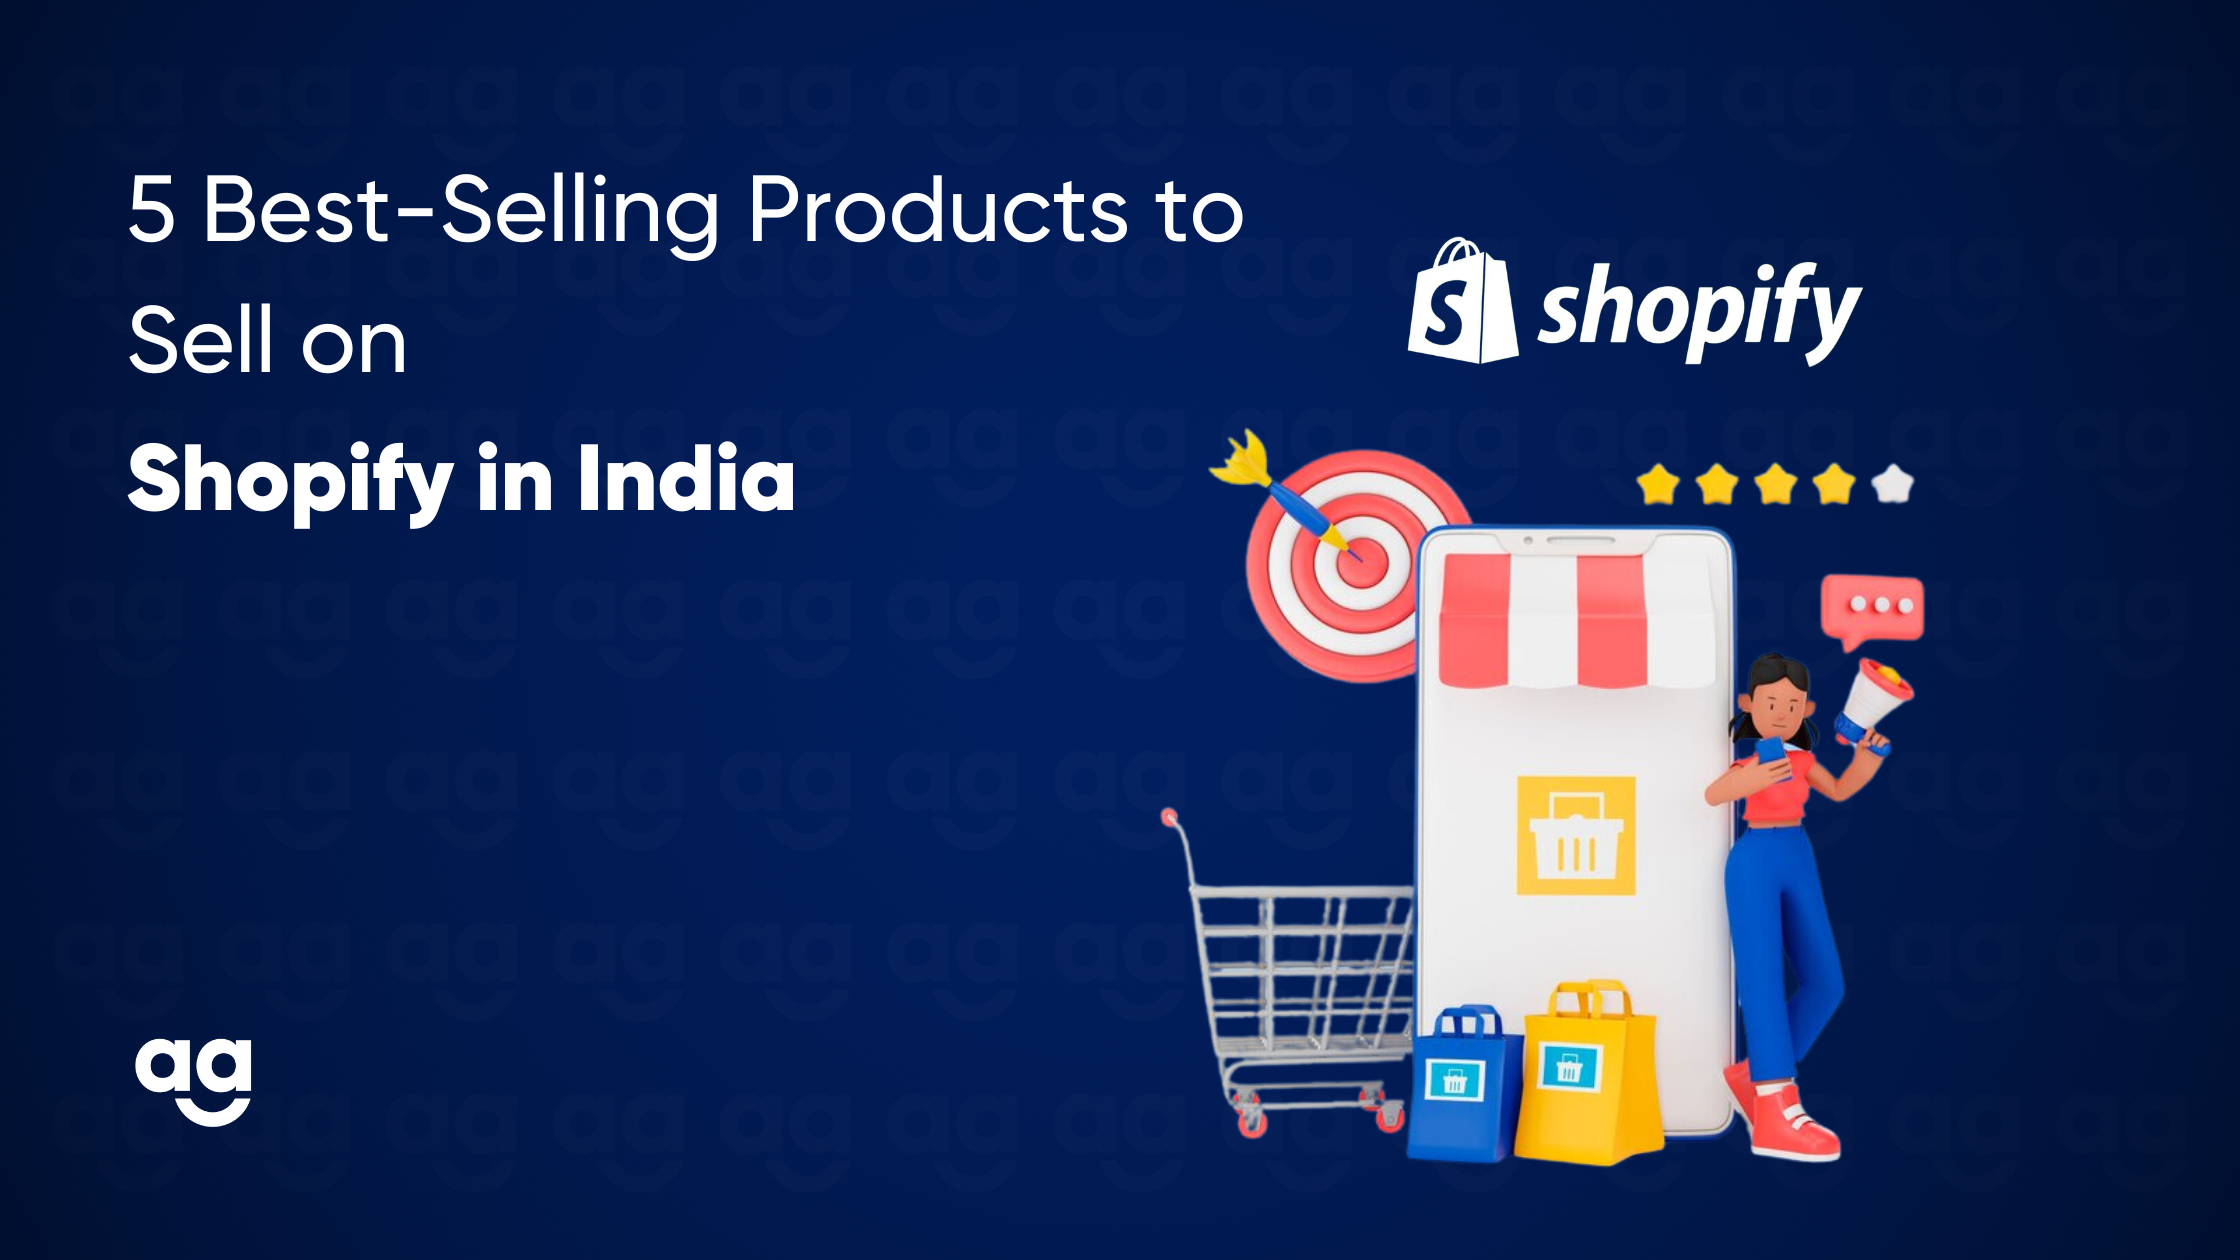 5 Best-Selling Products to Sell on Shopify in India